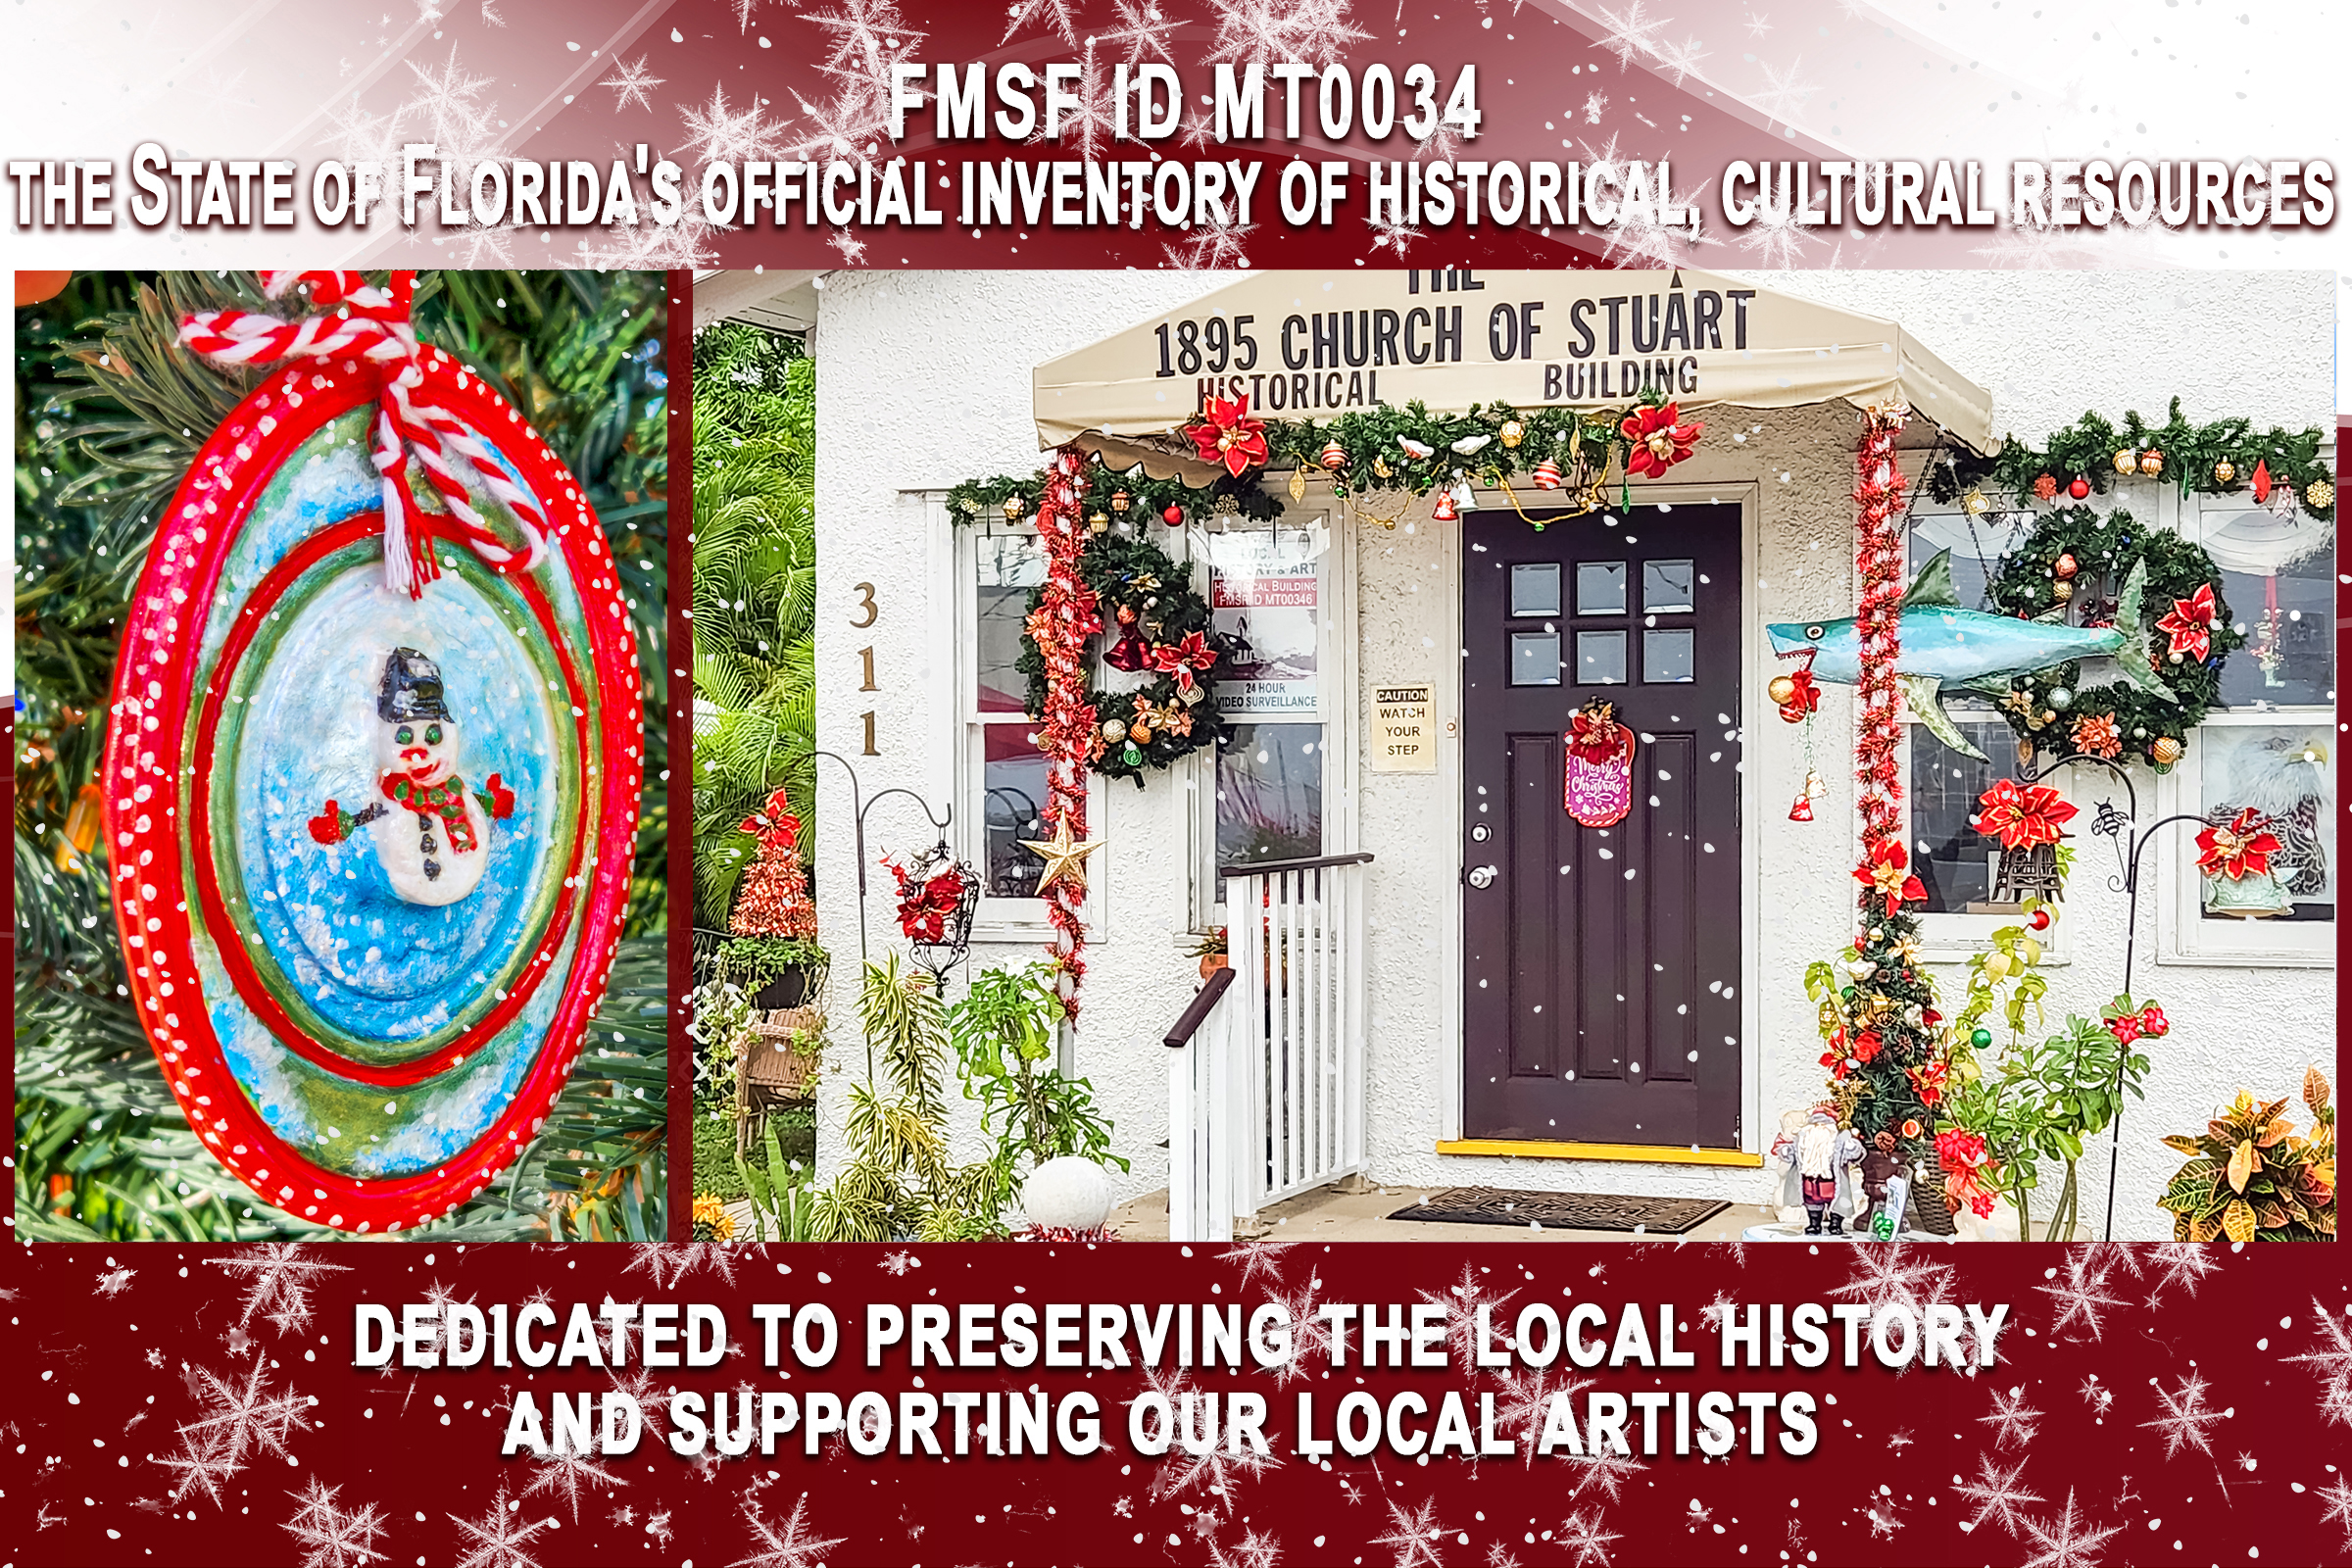 The 1895 Church of StuArt is a historical building in Downtown Stuart and the oldest church building located in what is now Martin County, Florida. Historic Heritage Preservation. Holiday Season, Christmas, Fine Art Sale.